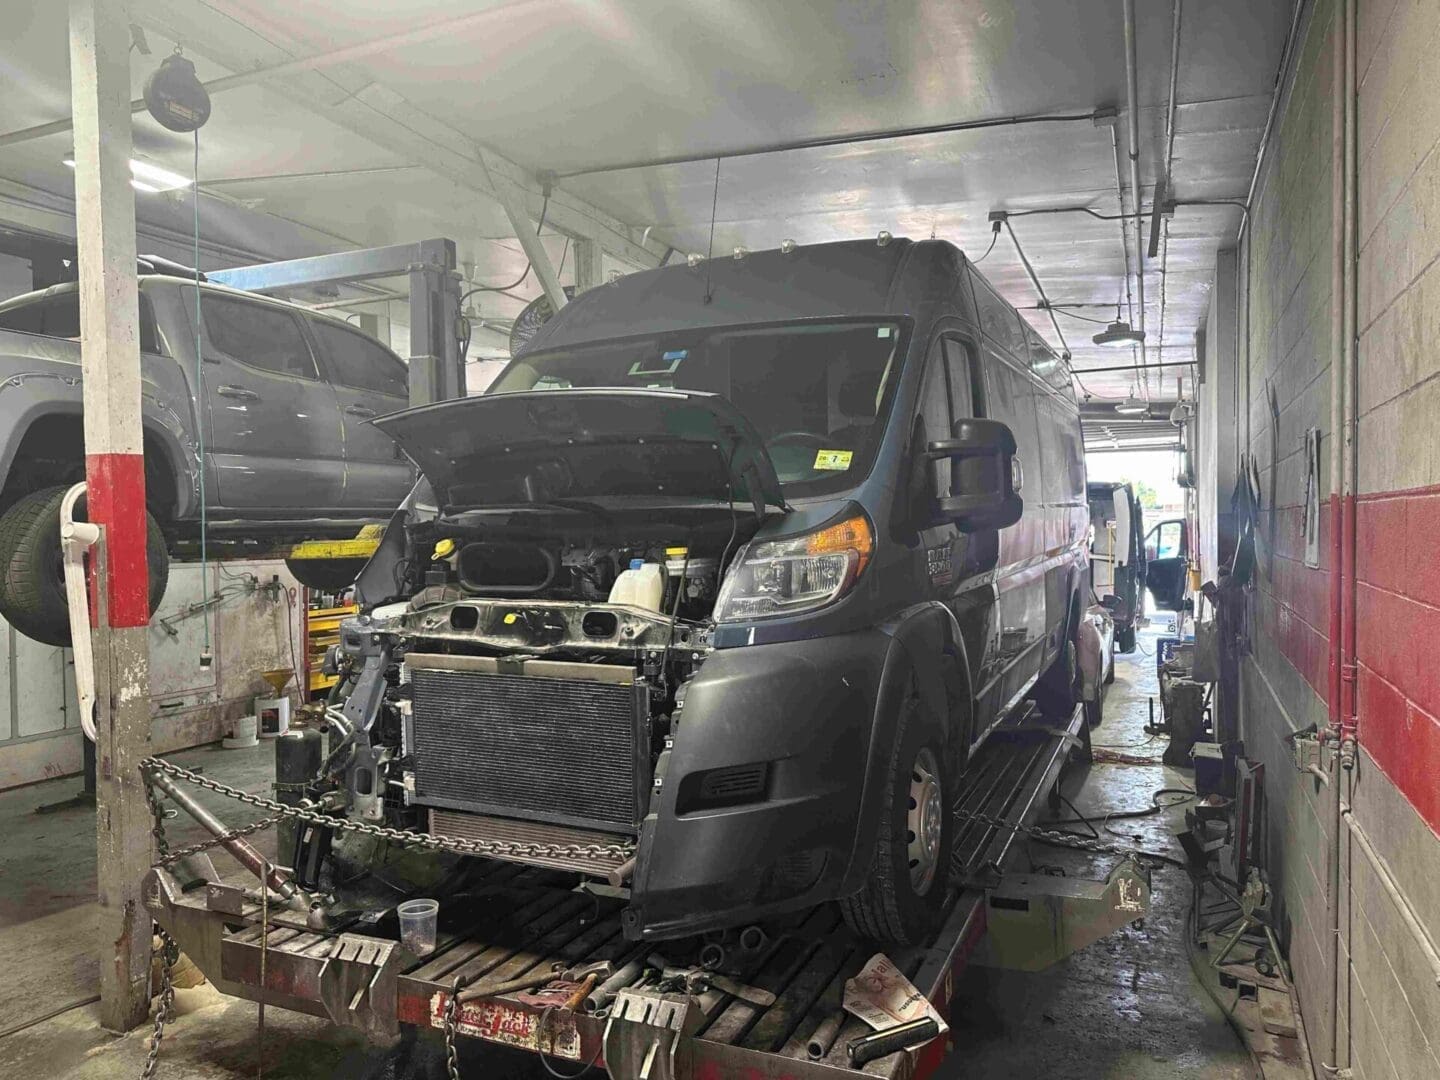 A van is being worked on in the garage.